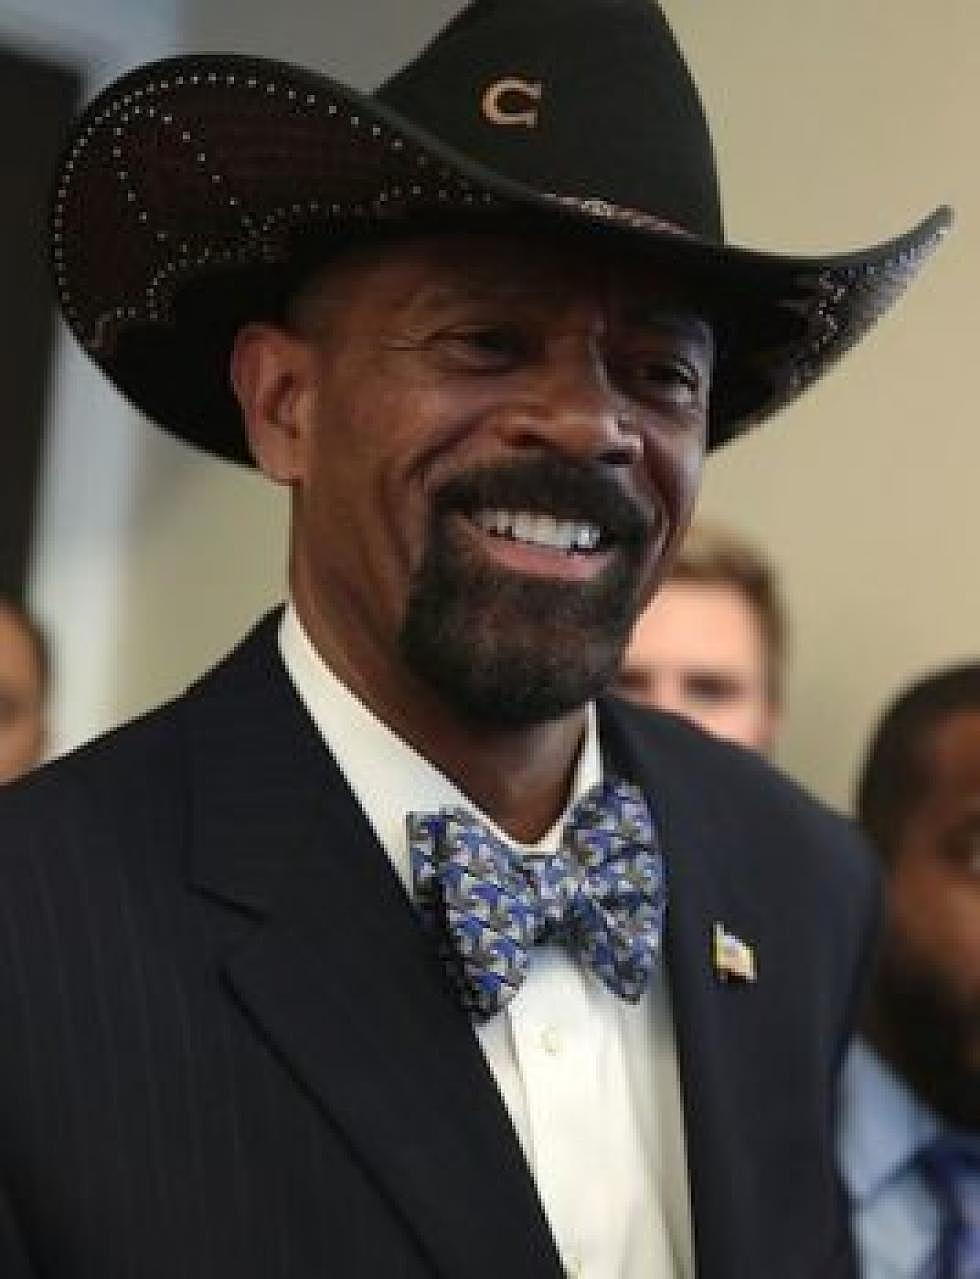 Prairie Lights: Yellowstone County GOP&#8217;s embrace of Sheriff Clarke a disgrace